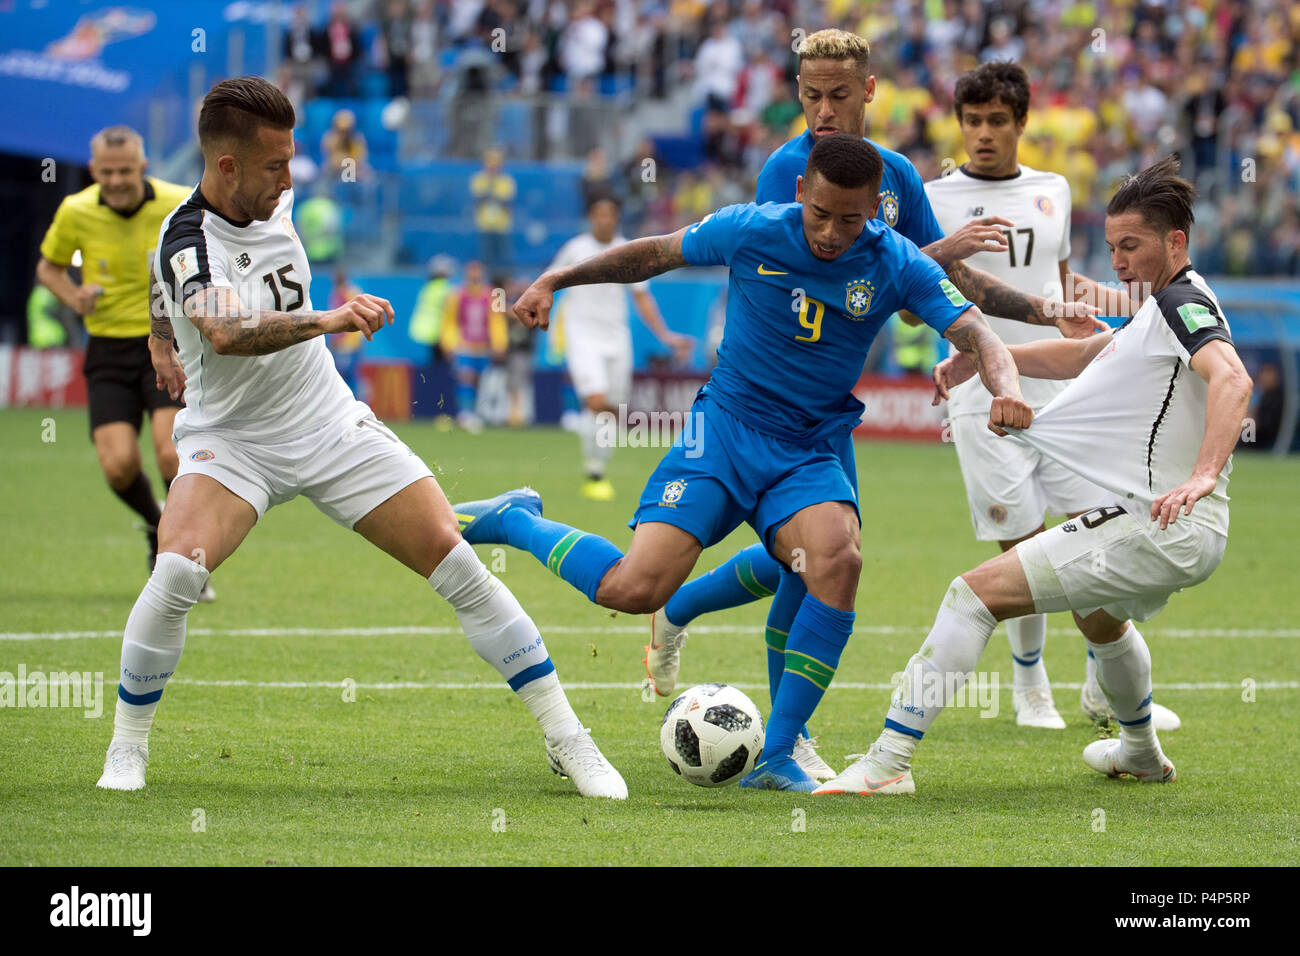 22 June 2018, Russia, Saint Petersburg, Soccer, Group E, Matchday 2 of 3, Brazil vs Costa Rica at the St. Petersburg Stadium: Gabriel Jesus (L) from Brazil and Oscar Duarte from Costa Rica vie for the ball. Photo: Federico Gambarini/dpa Credit: dpa picture alliance/Alamy Live News Stock Photo